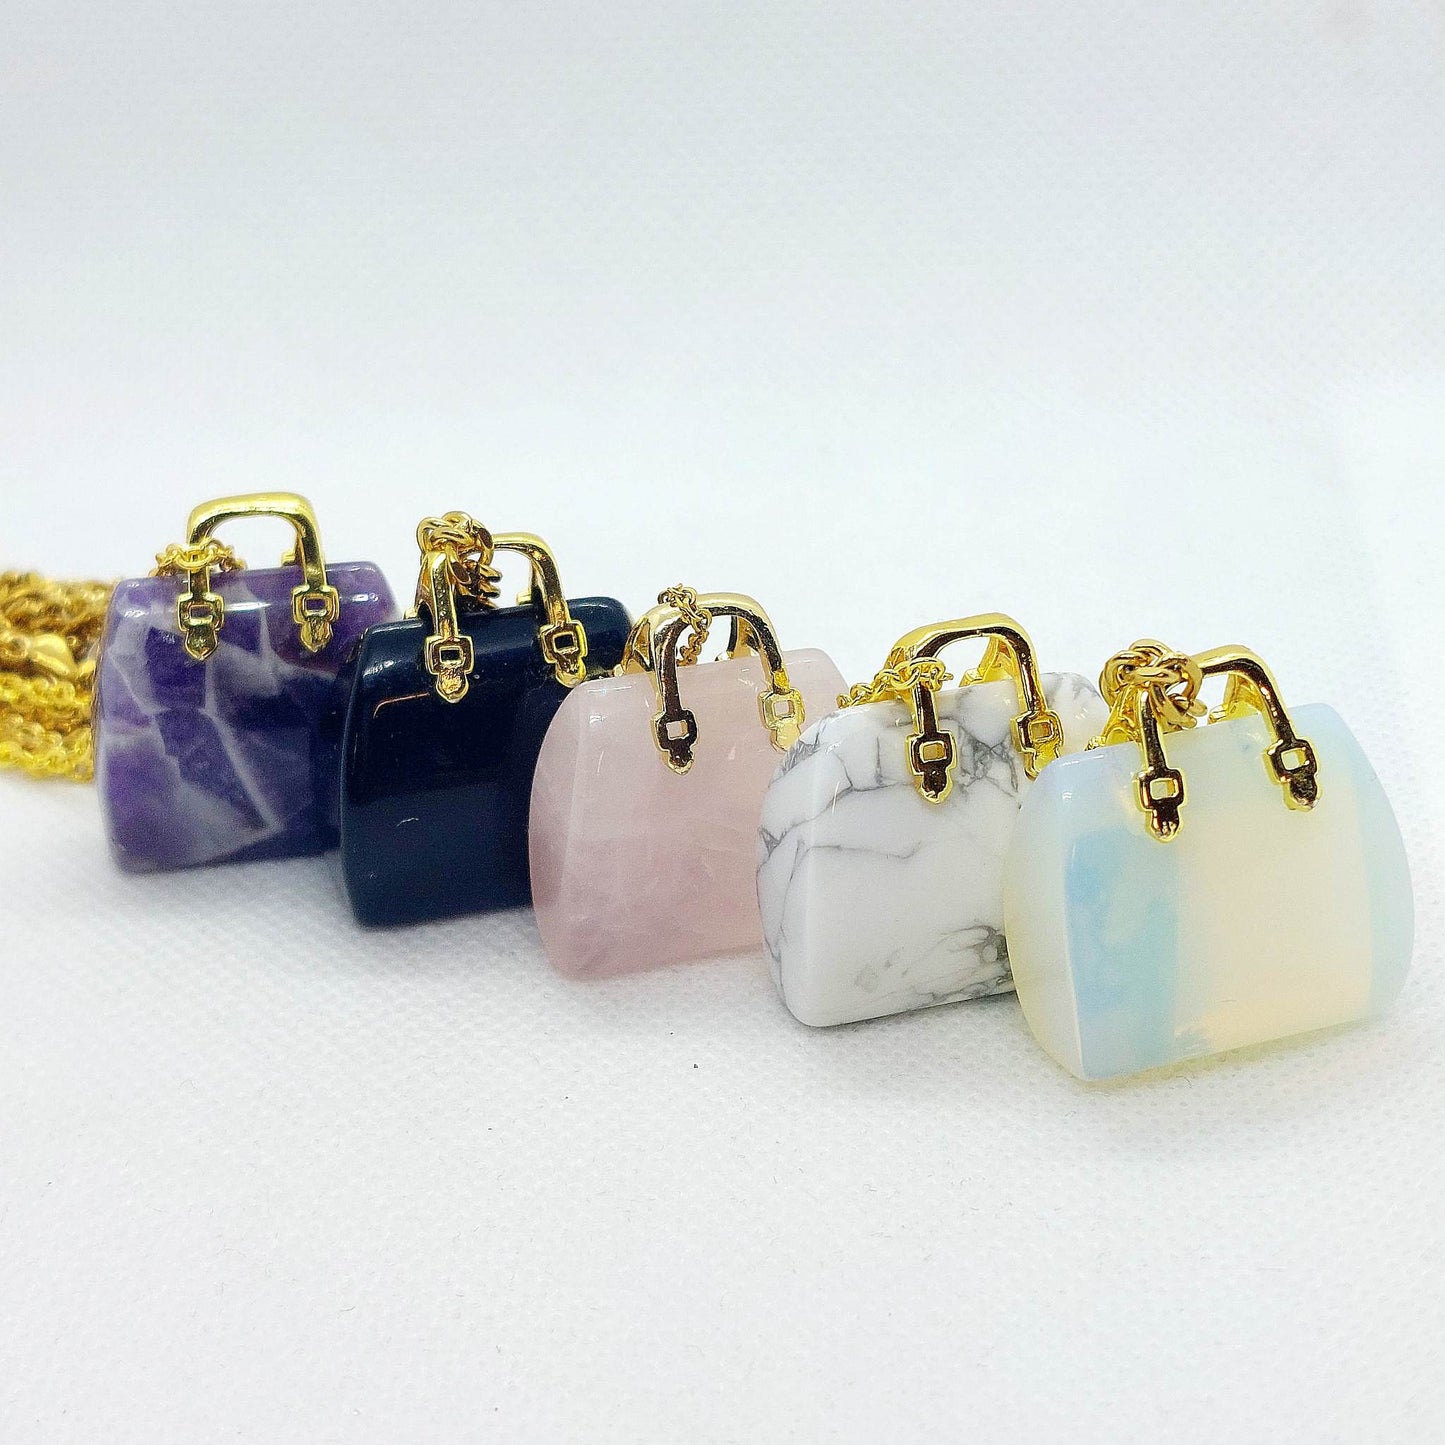 Natural Rose Quartz Handbag Pendant - Stainless Steel Gold Plated Chain Necklace